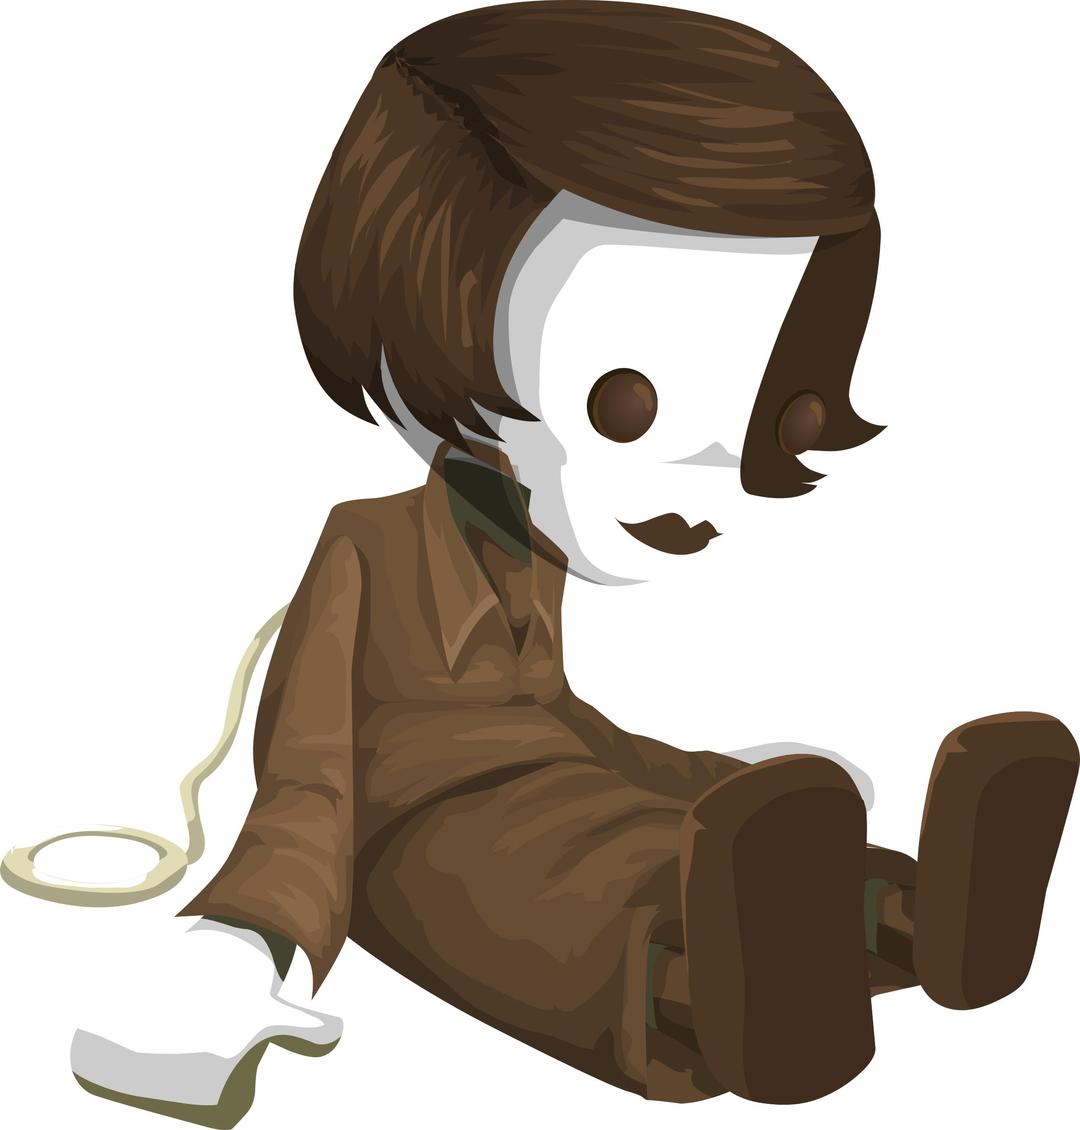 Misc Doll Ayn Rand png transparent